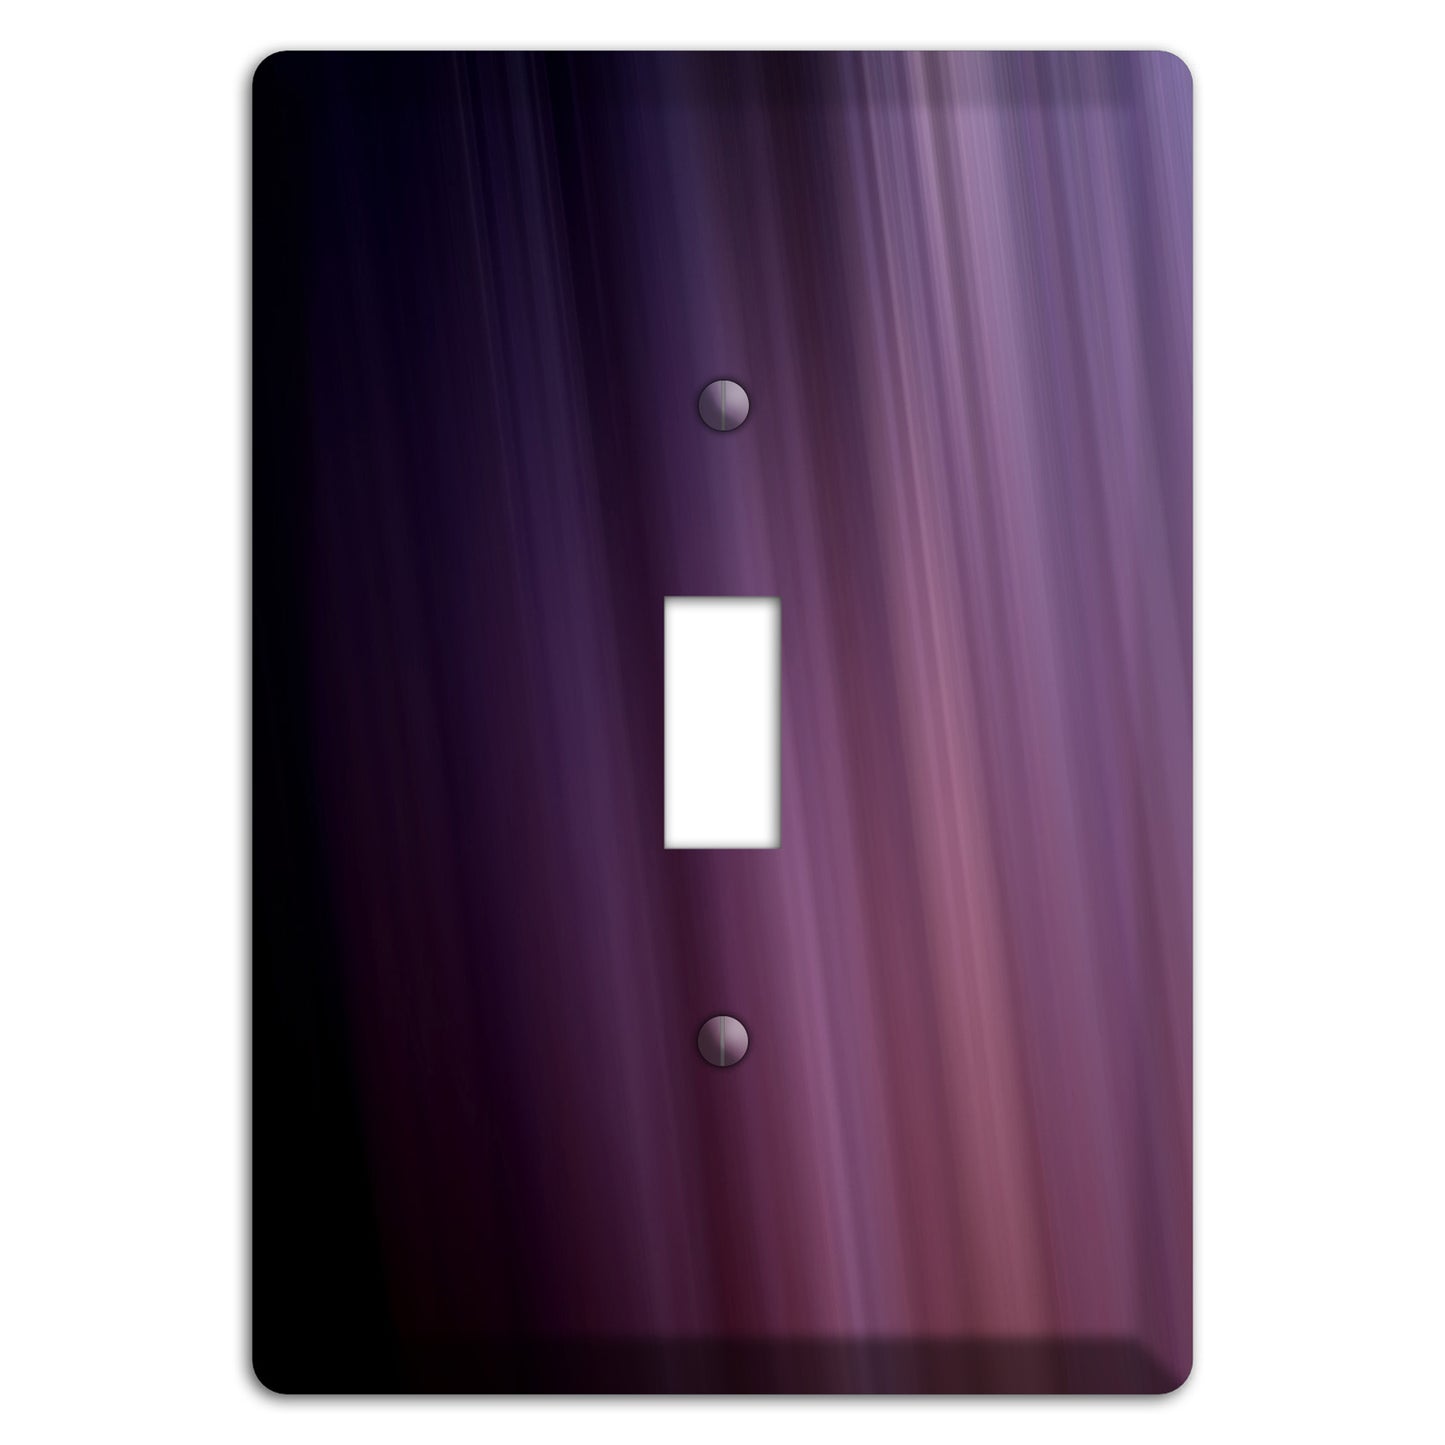 Eggplant Ray of Light Cover Plates